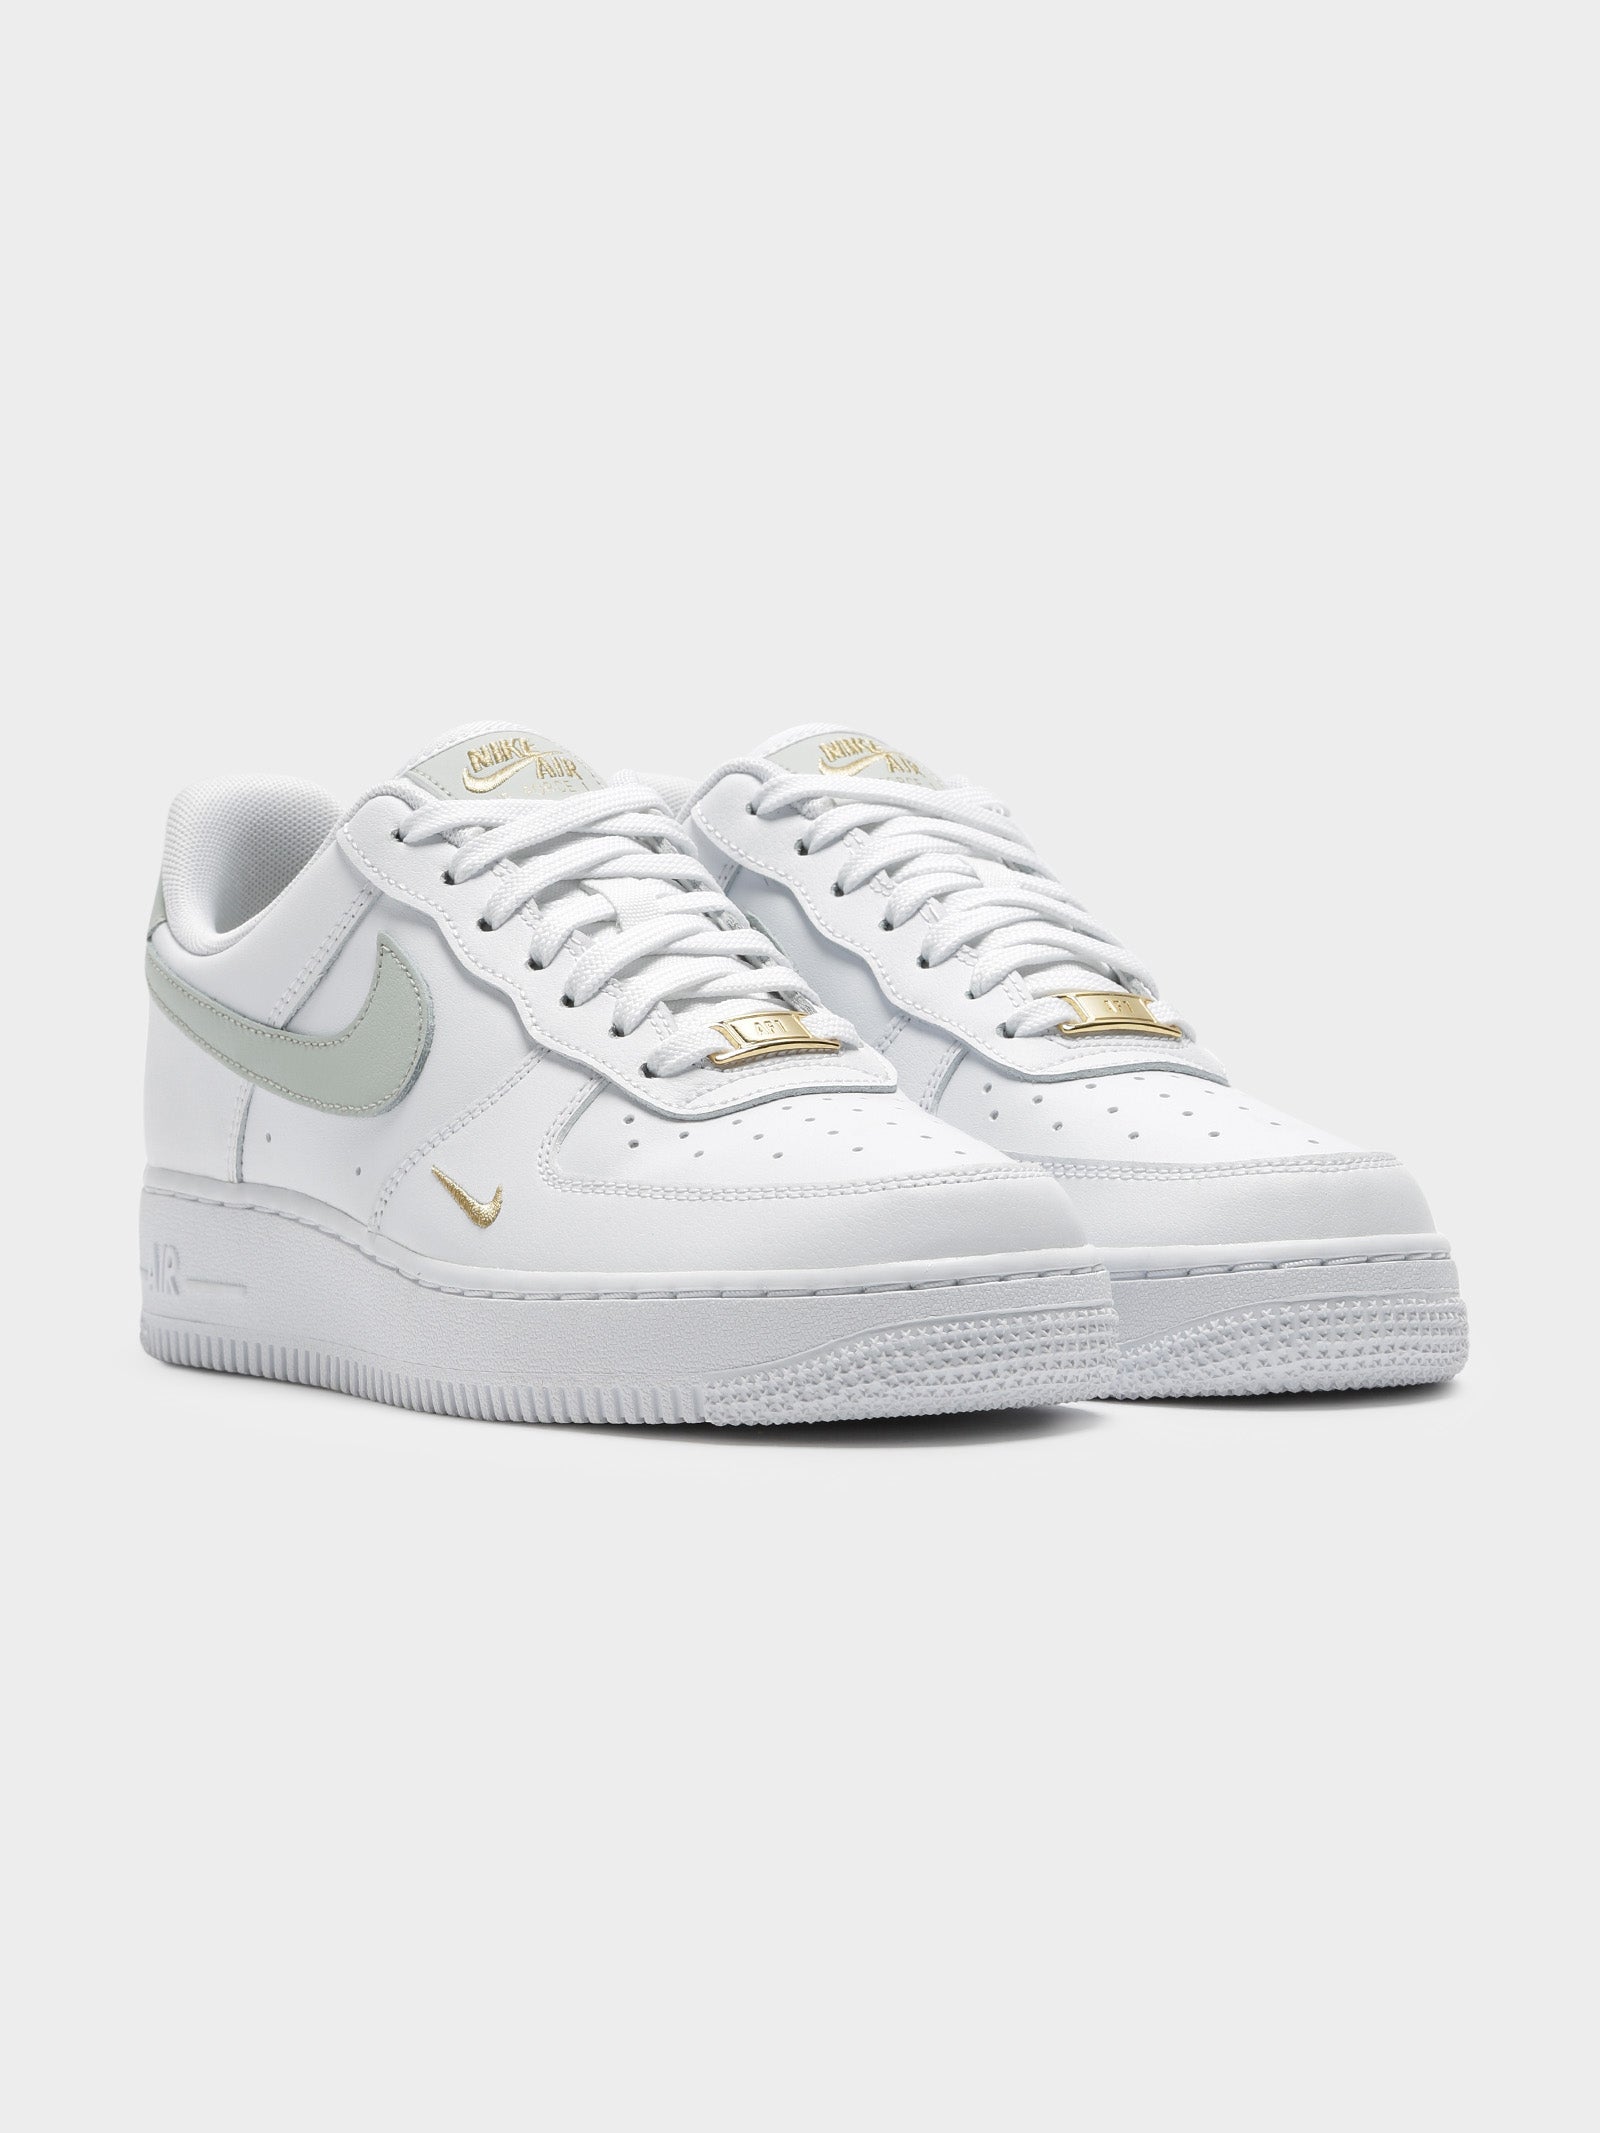 Womens Air Force 1 '07 Sneakers in White & Grey